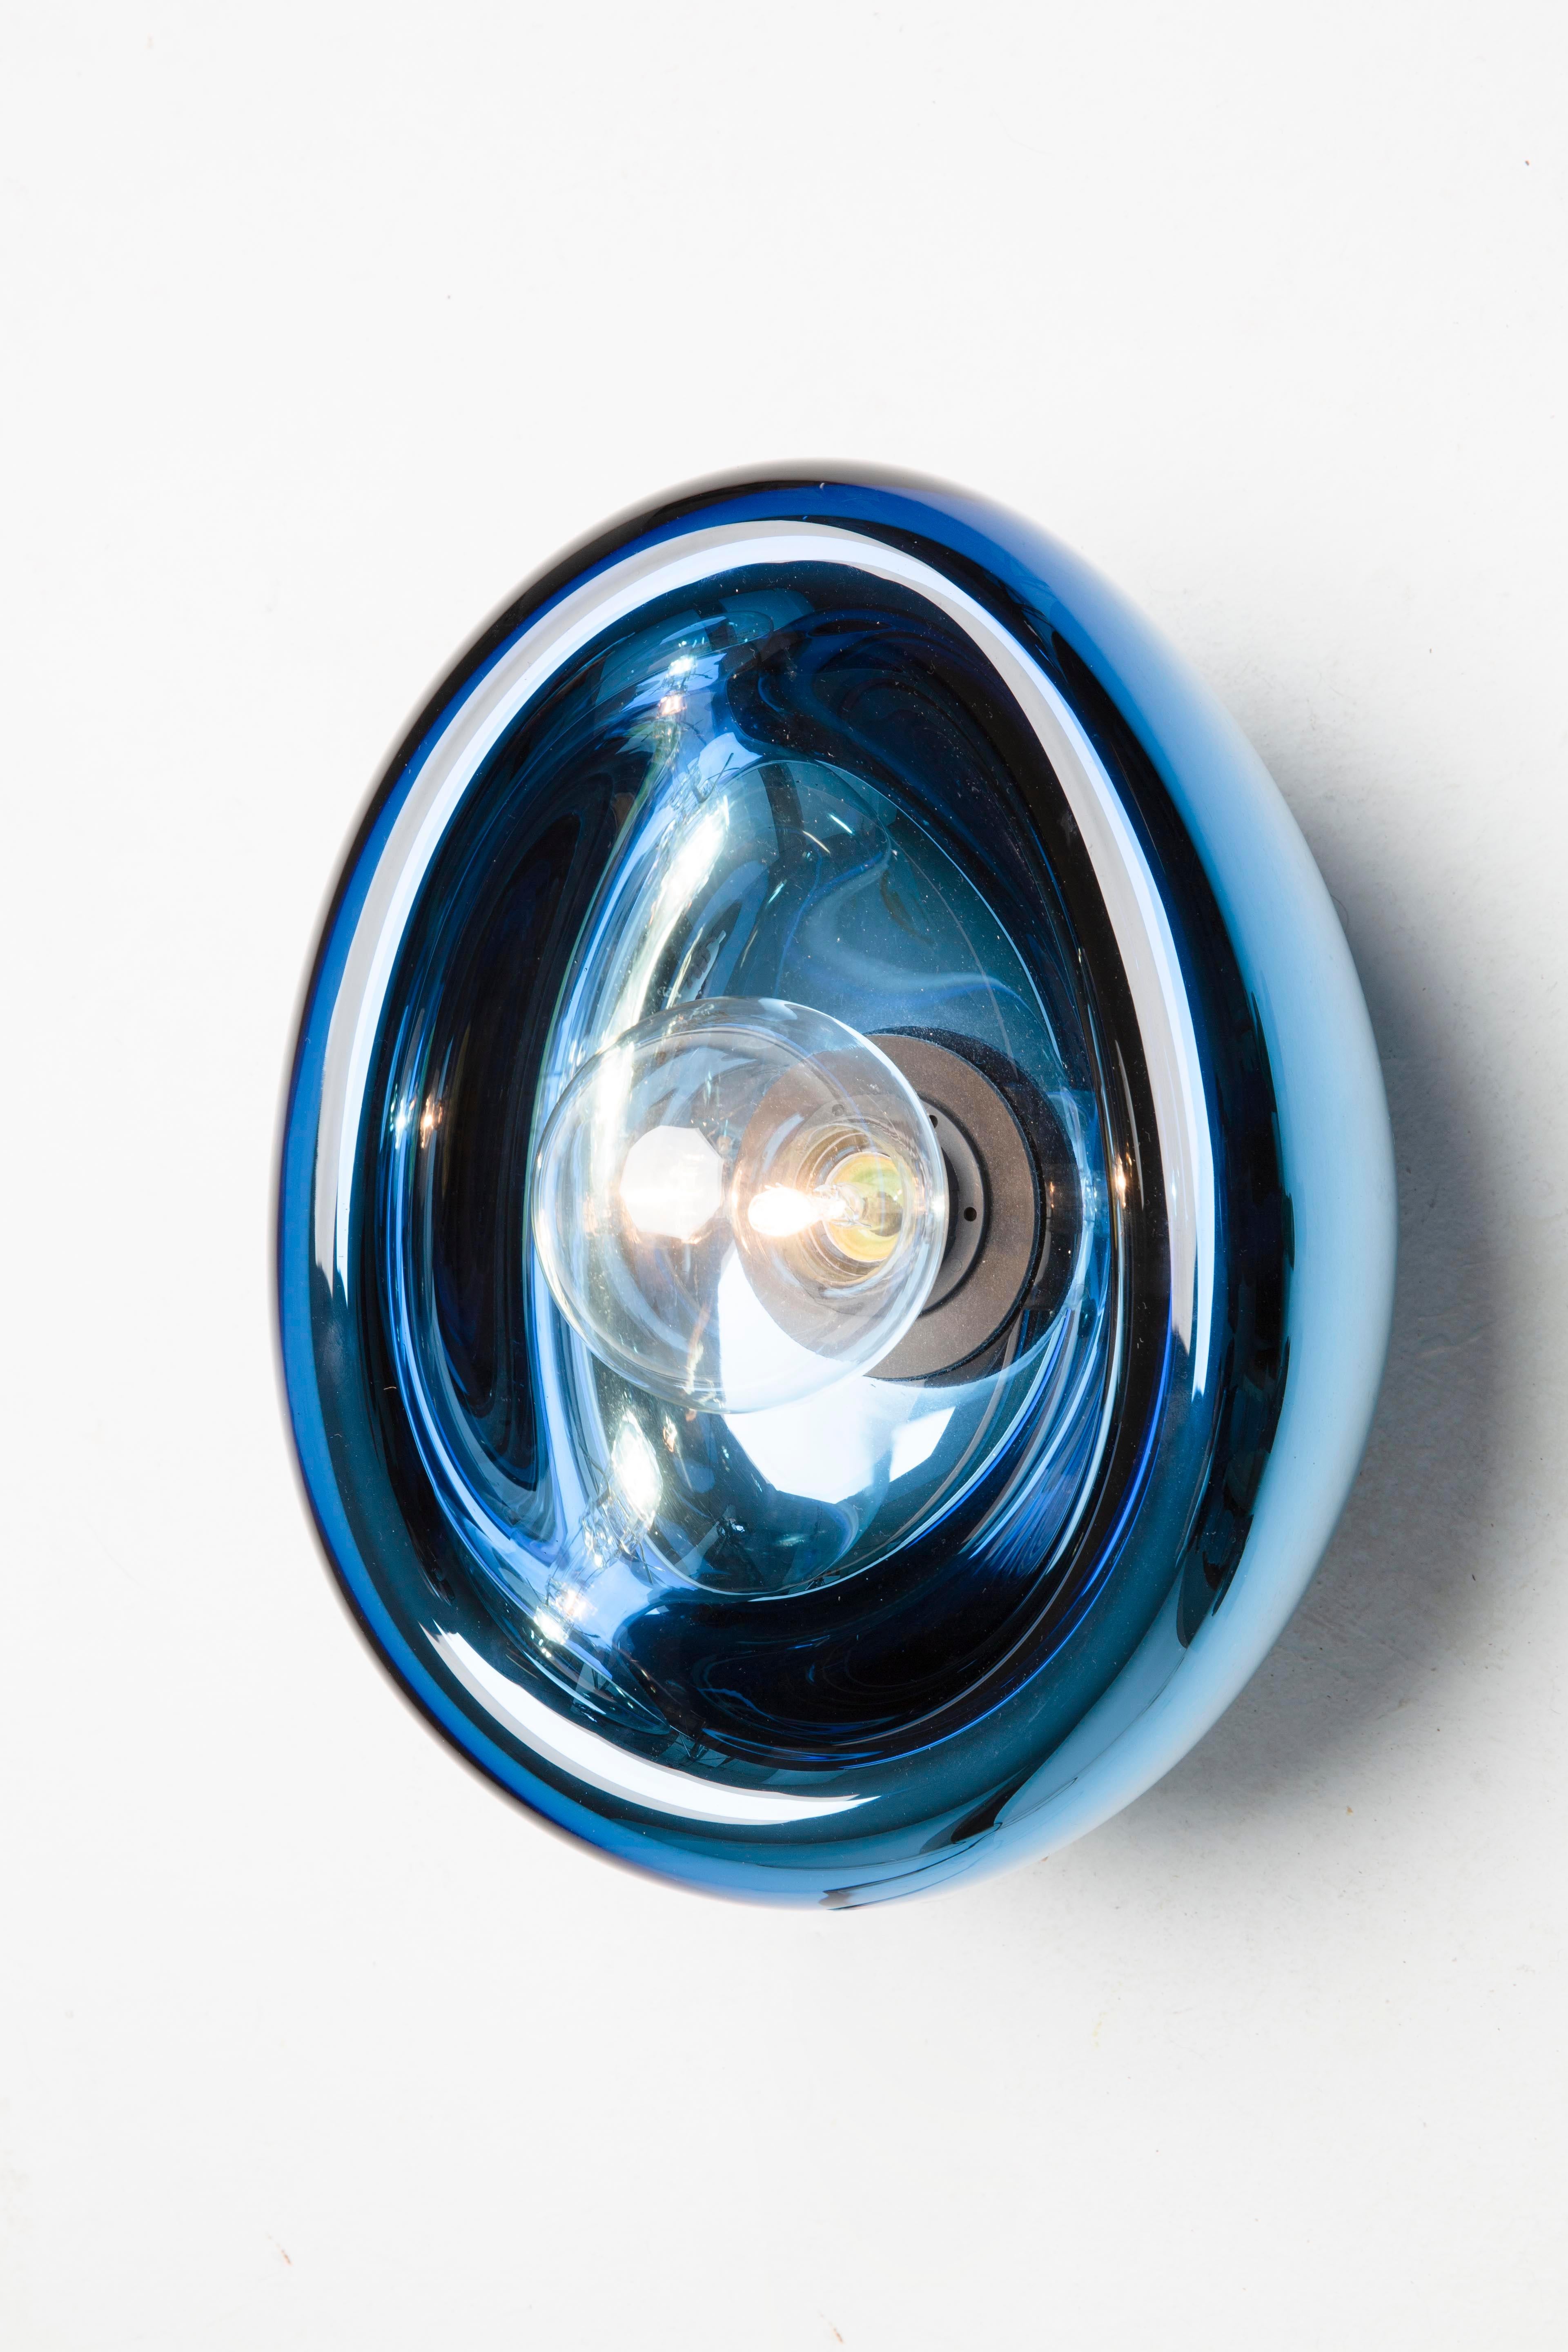 Big Aurum blue glass sconces by Alex de Witte
Dimensions: D 30 x H 40 cm
Materials: Mouth blown glass
It can be purchased as an ensemble or individual, in different dimensions and colors.
Dimensions may vary.

Aurum shows how Alex de Witte is able